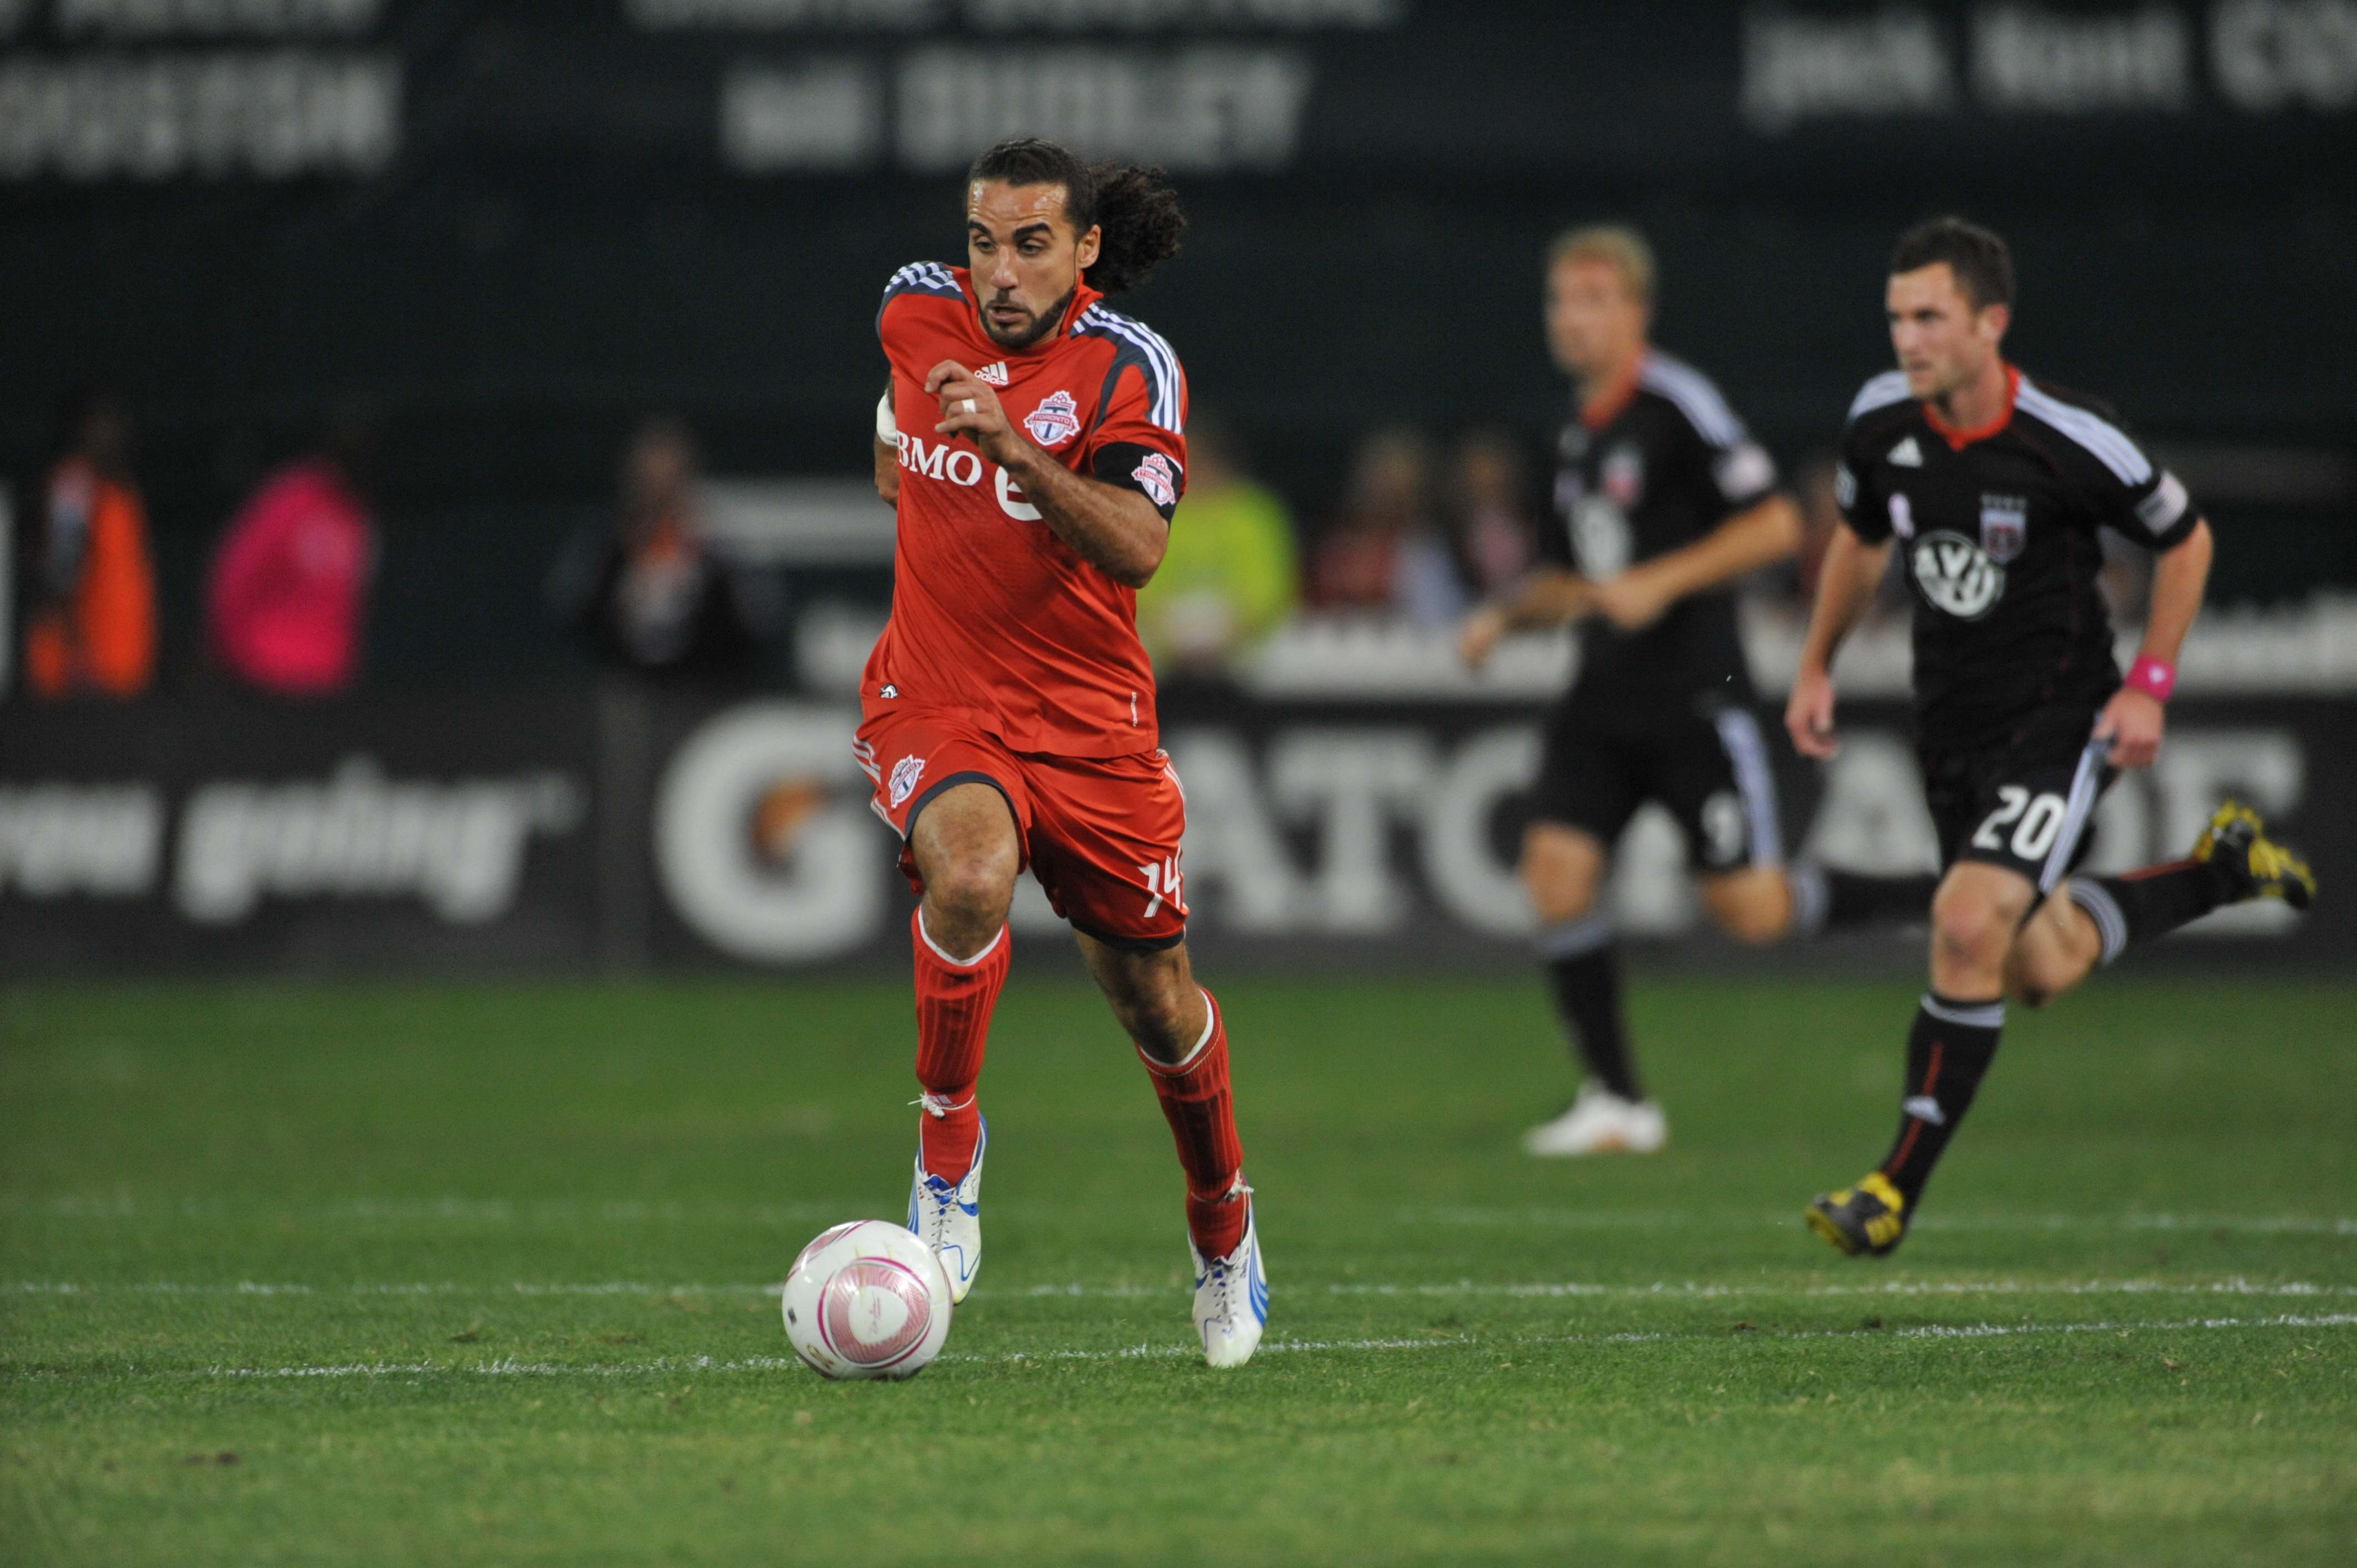 WASHINGTON, DC - OCTOBER 23:  Dwayne De Rosario #14 of Toronto FC dribbles upfield against D.C. United at RFK Stadium on October 23, 2010 in Washington, DC. Toronto defeated DC 3-2. (Photo by Larry French/Getty Images)